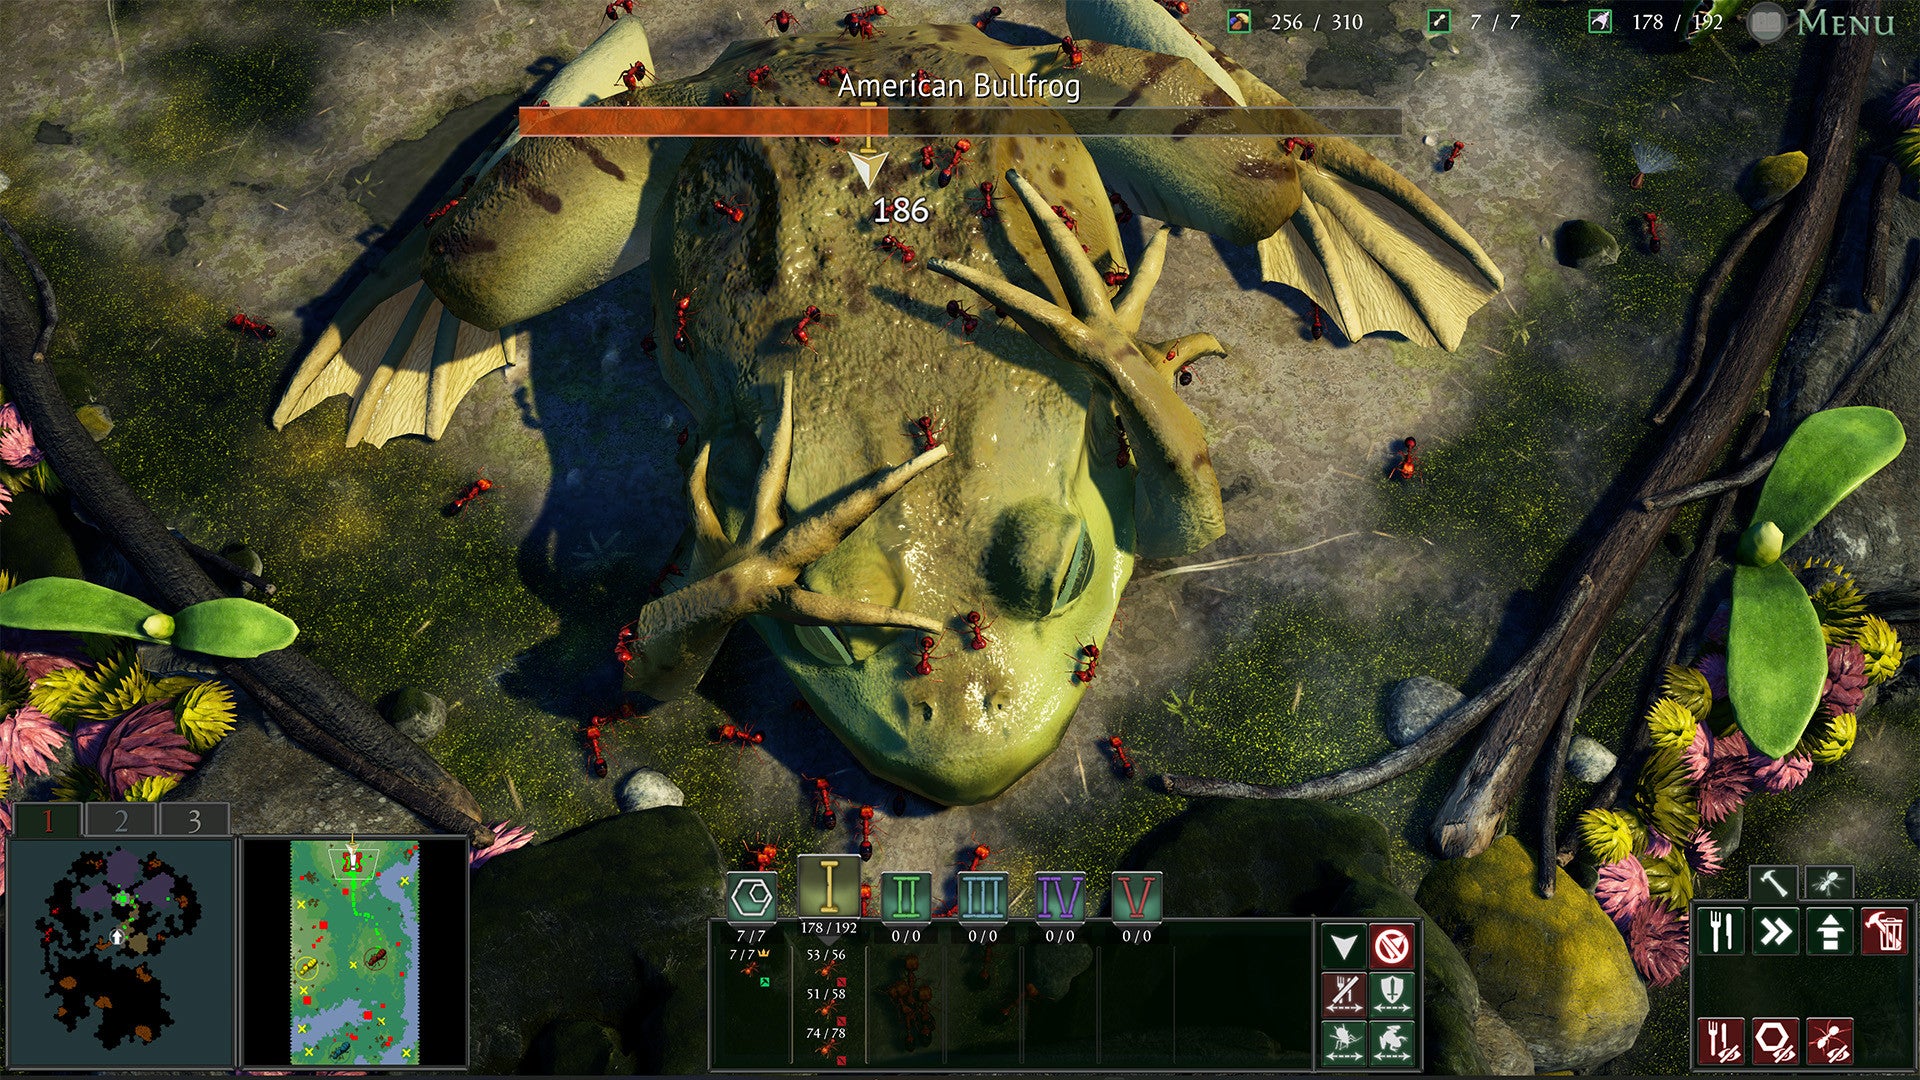 Insect RTS Empires Of The Undergrowth leaves early access in June, adding savannahs, termites and stink ants